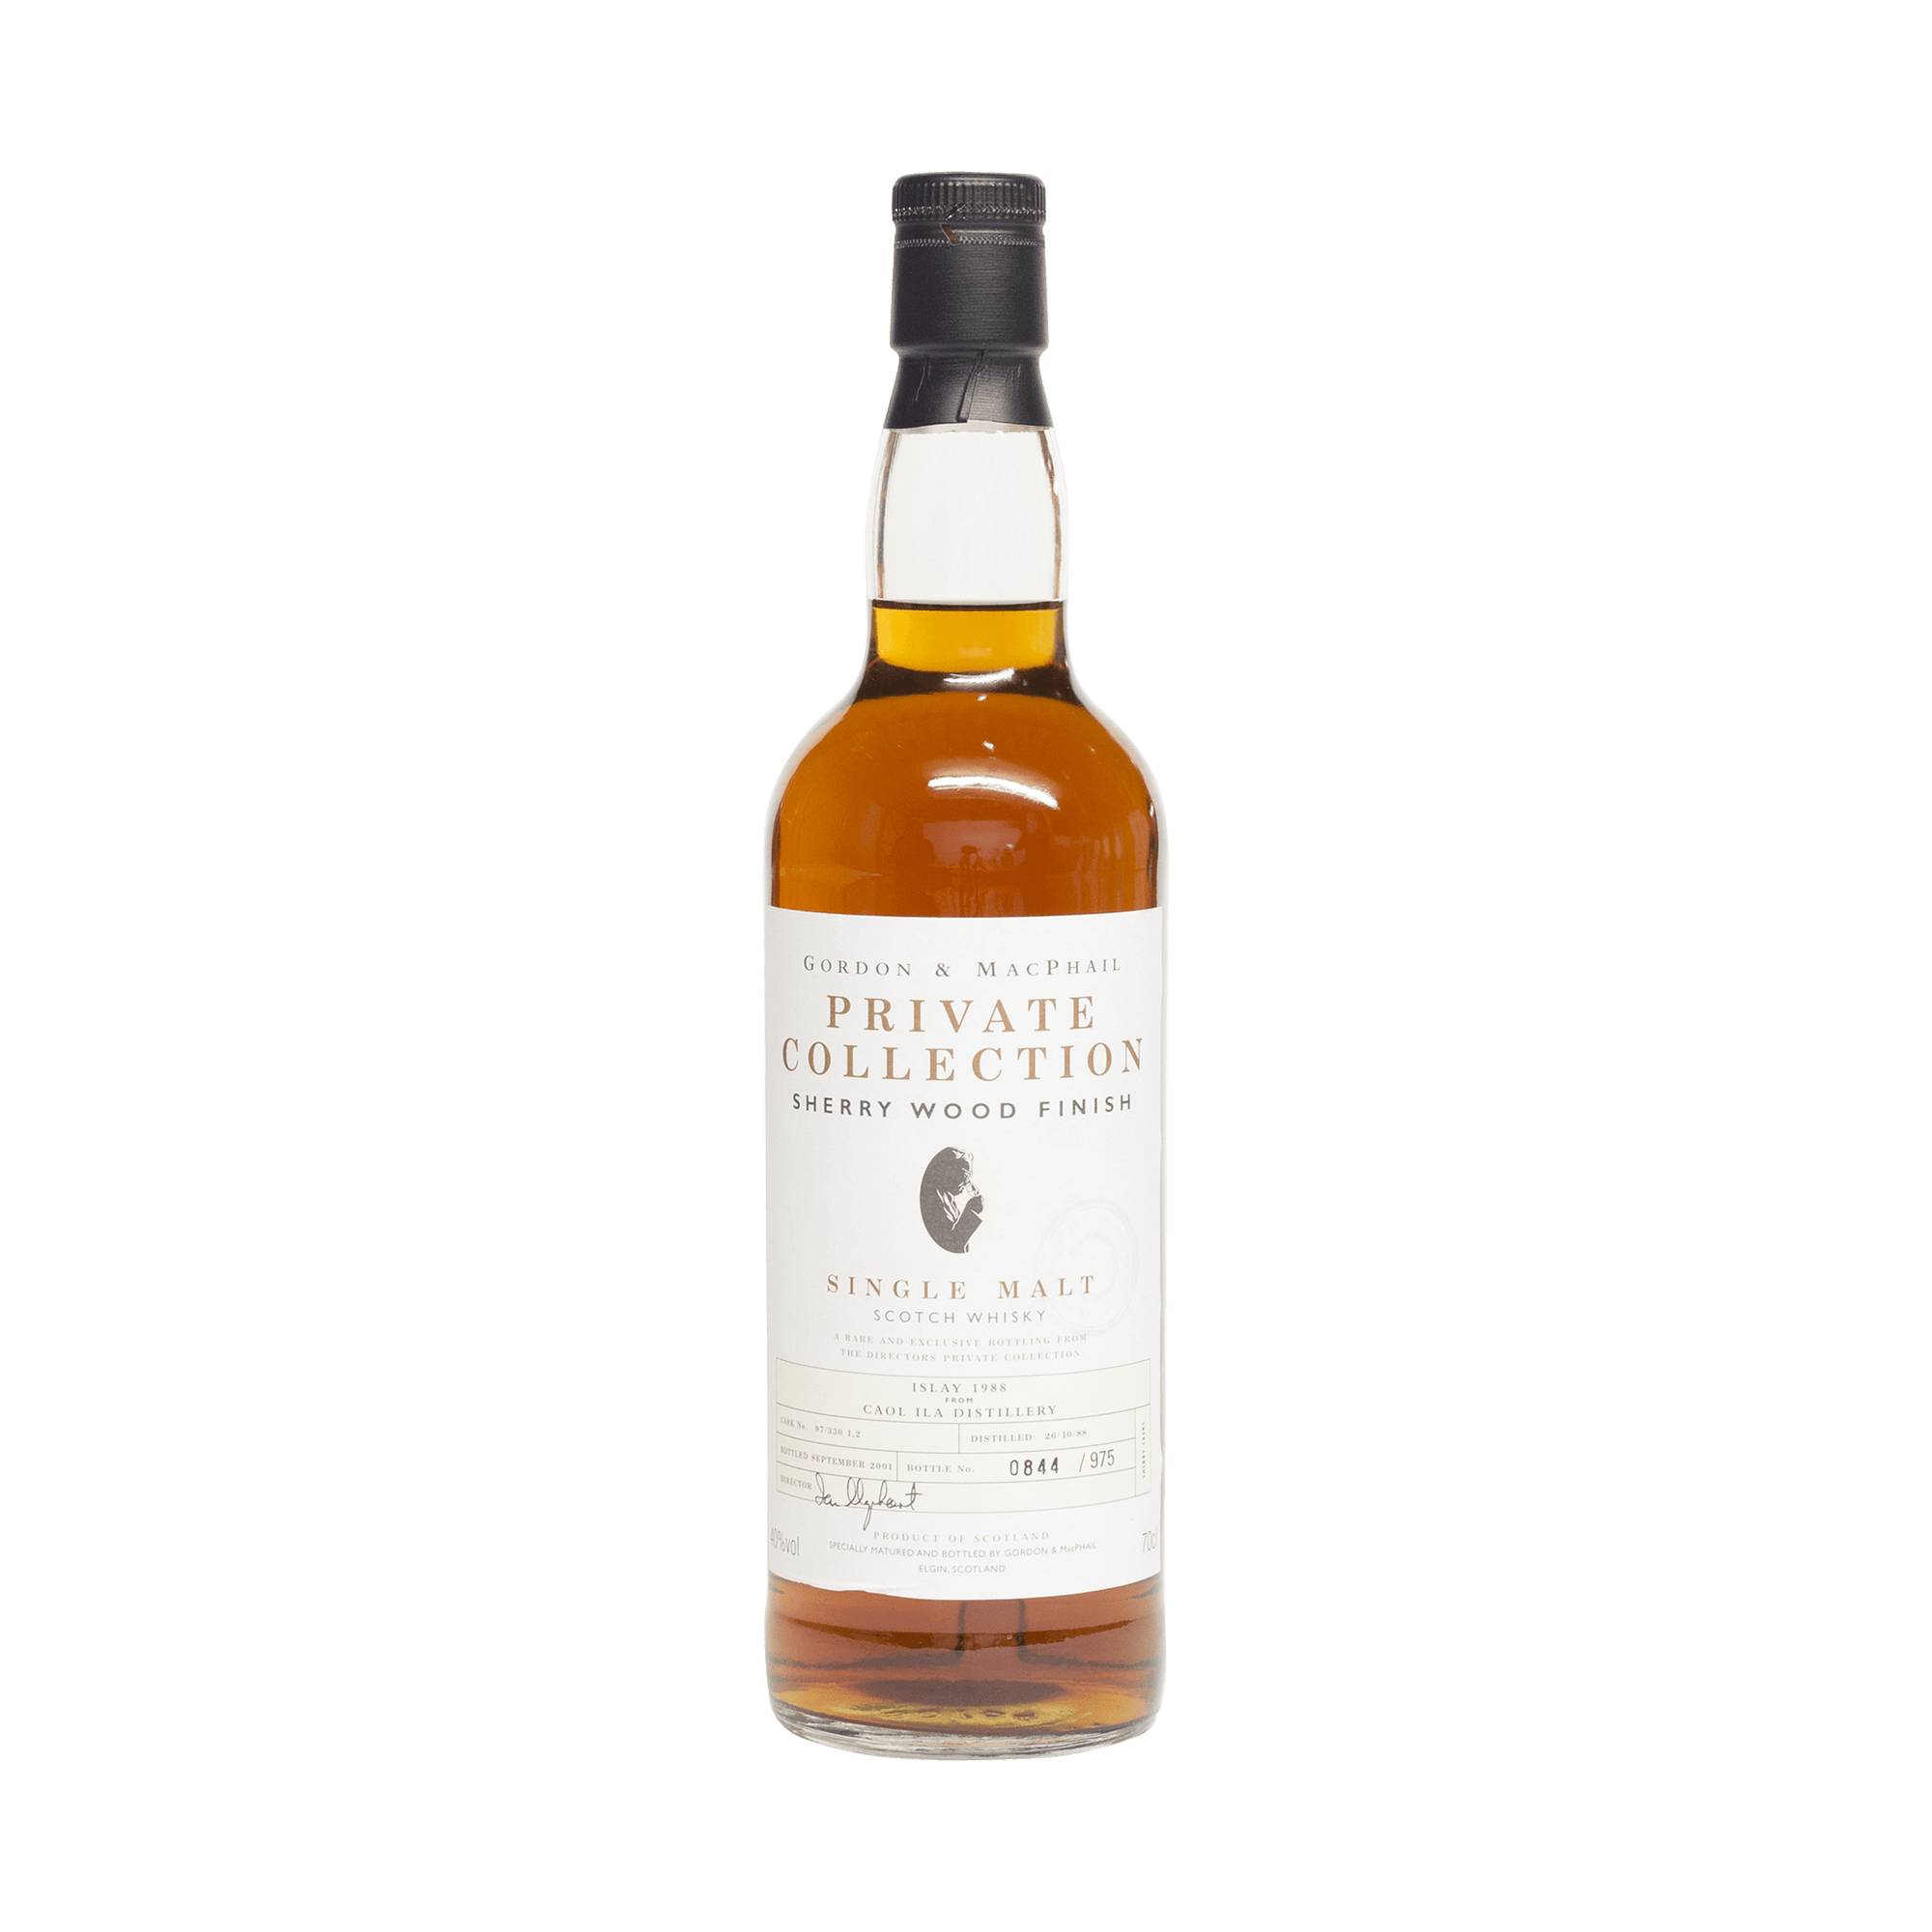 Caol Ila 1988 13 Year Old 'Private Collection' Gordon & MacPhail 40.00%